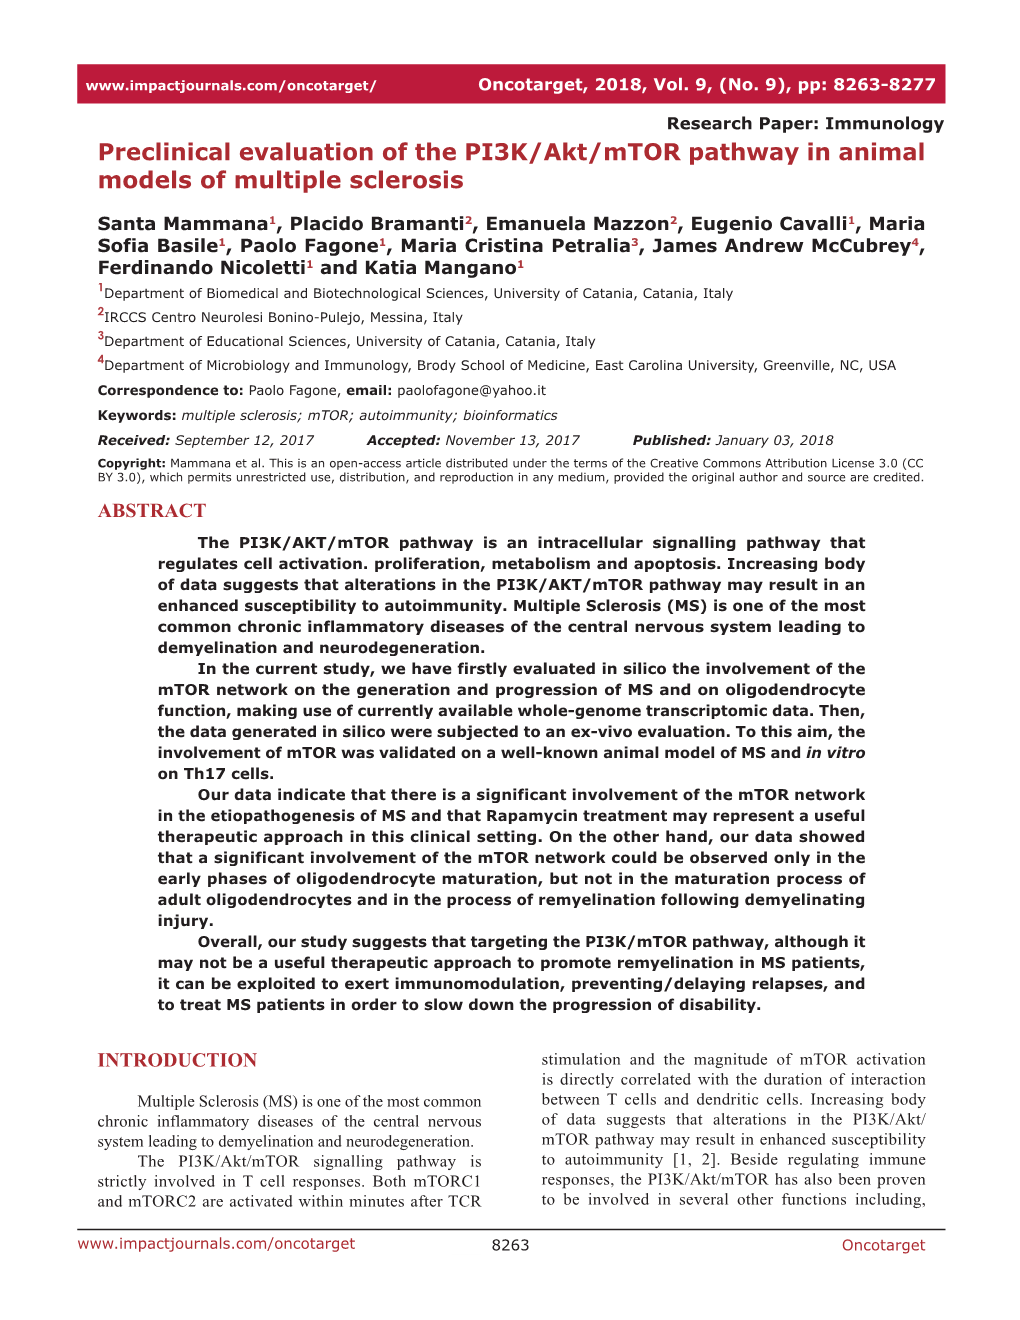 Preclinical Evaluation of the PI3K/Akt/Mtor Pathway in Animal Models of Multiple Sclerosis